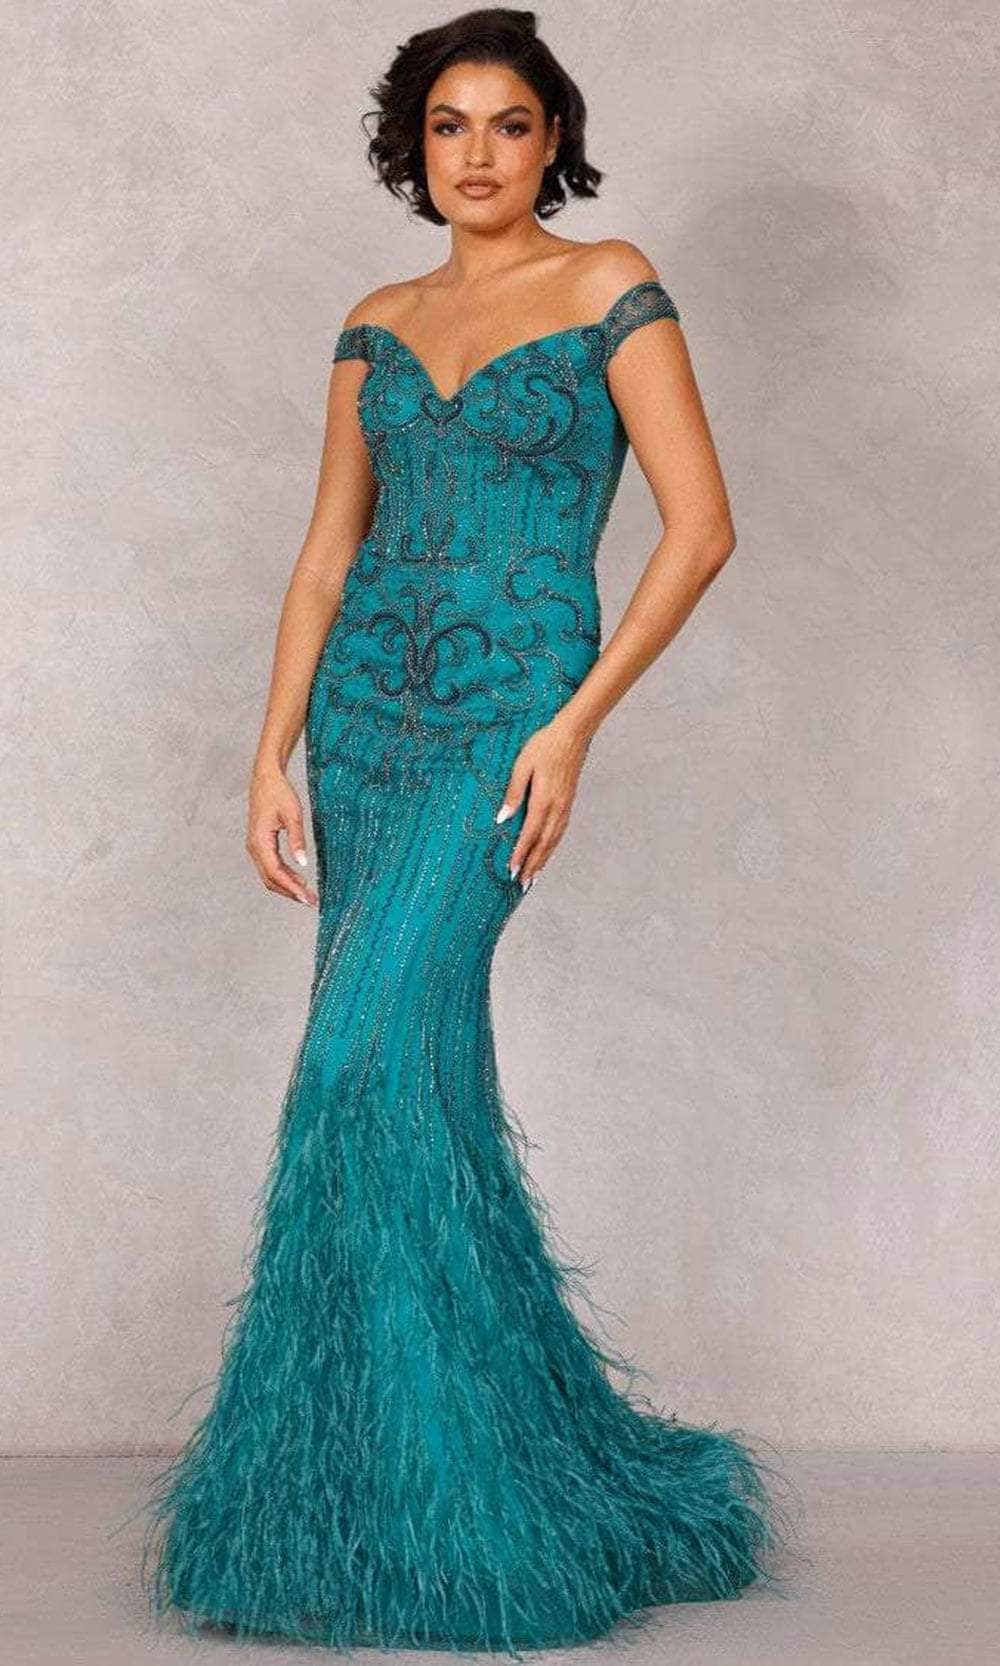 Image of Terani Couture 2214GL0113 - Feather-Ornate Beaded Evening Dress